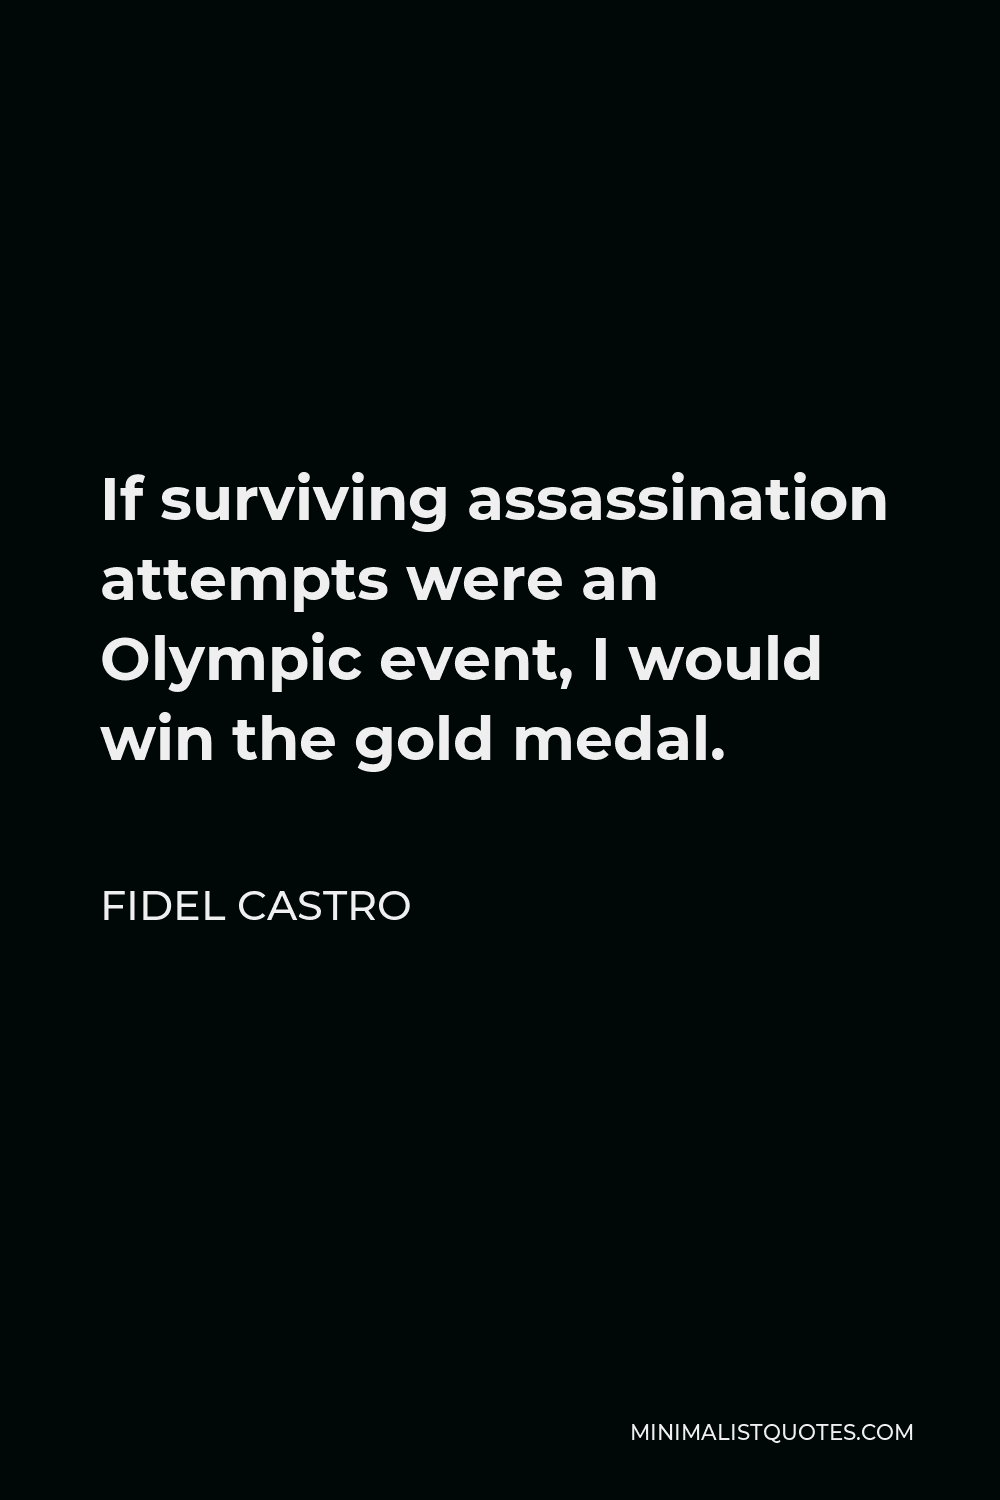 Fidel Castro Quote - If surviving assassination attempts were an Olympic event, I would win the gold medal.